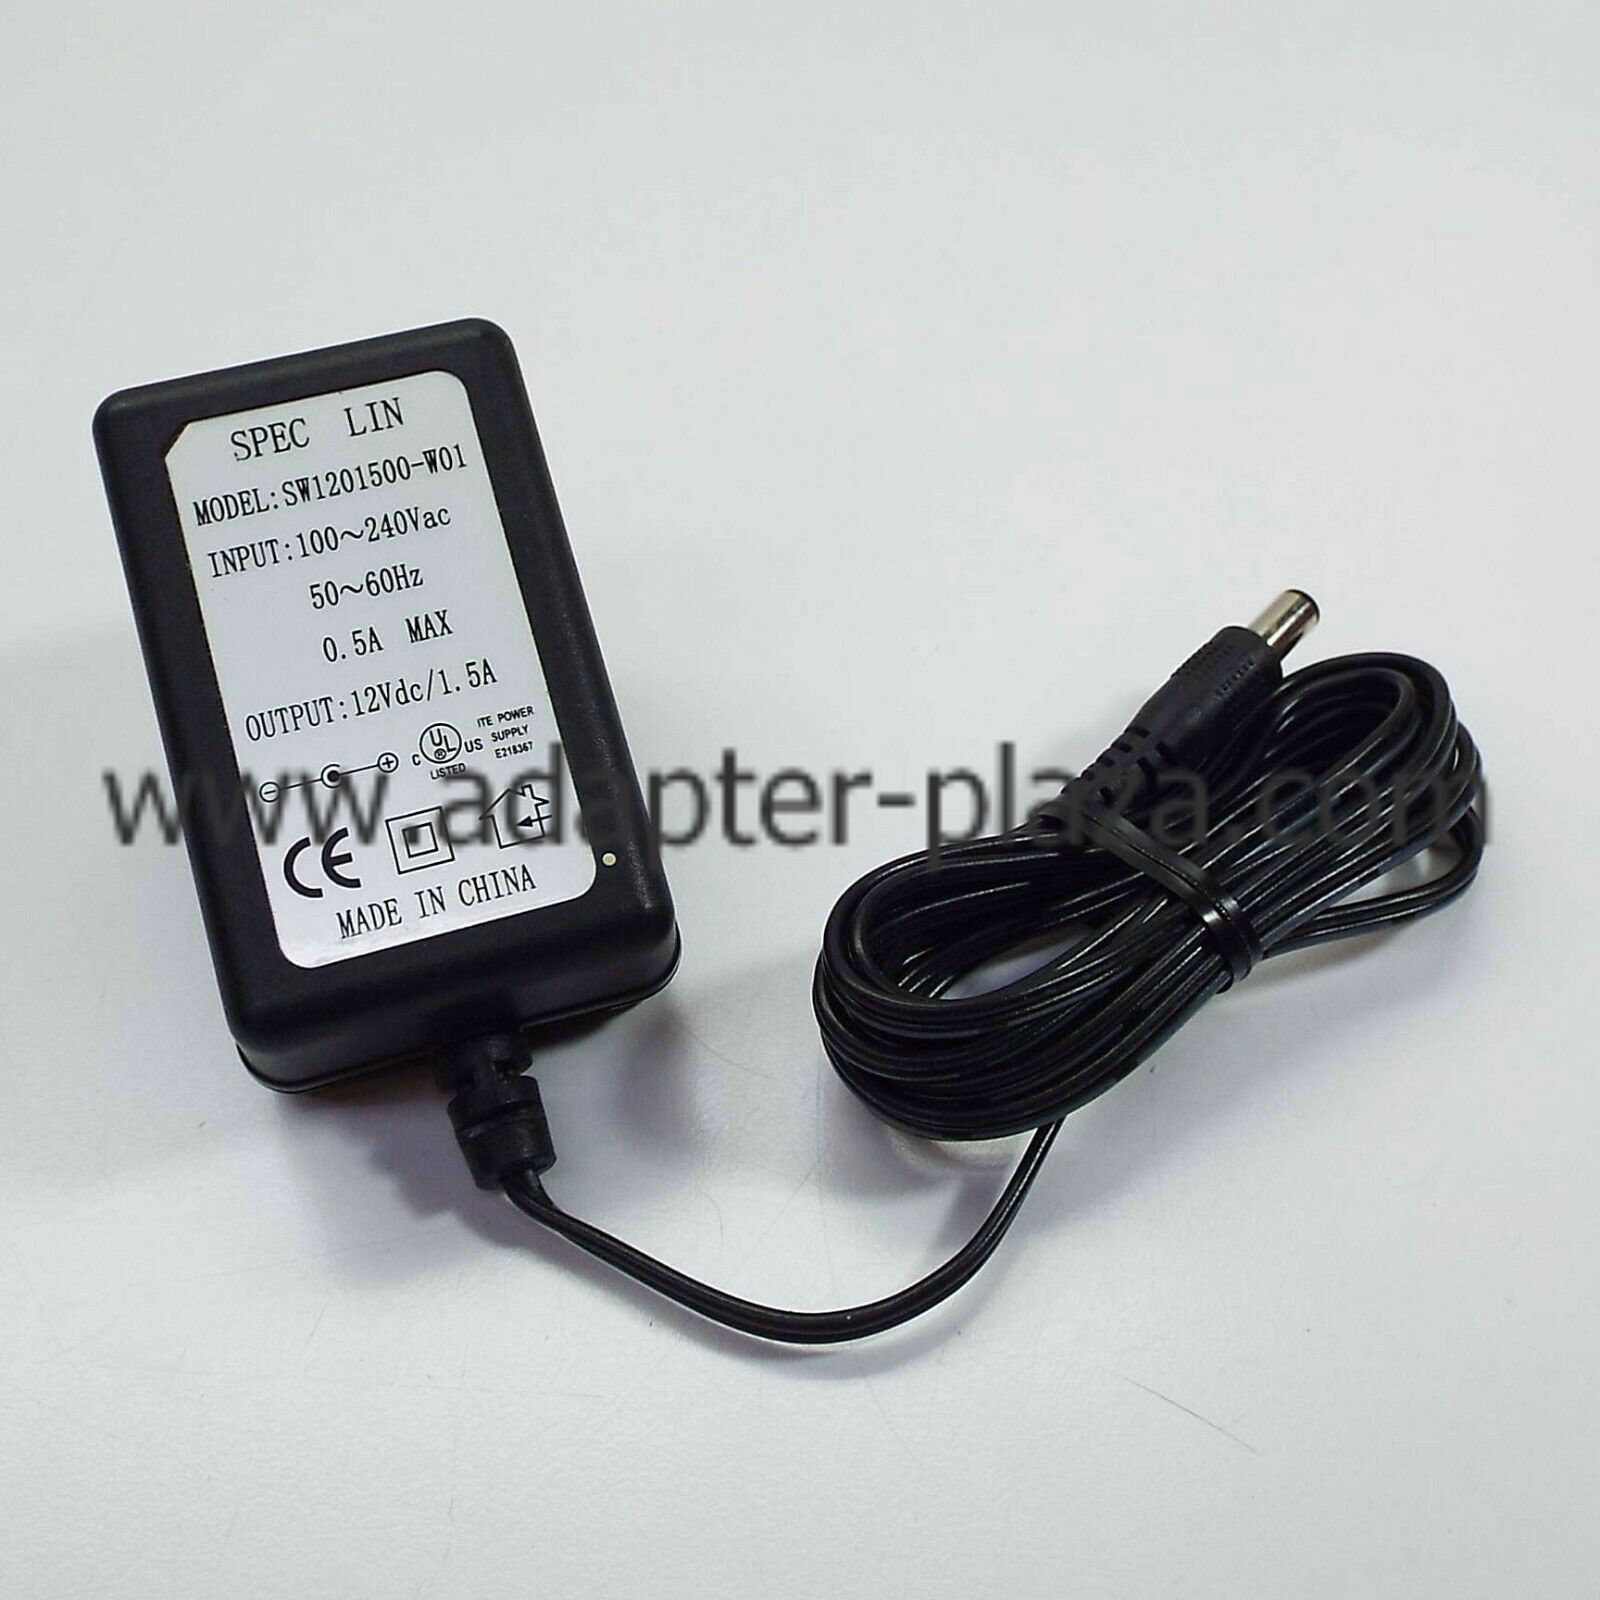 *Brand NEW*Haier Model SW1201500-W01 12VDC 1.5A AC DC Adapter POWER SUPPLY